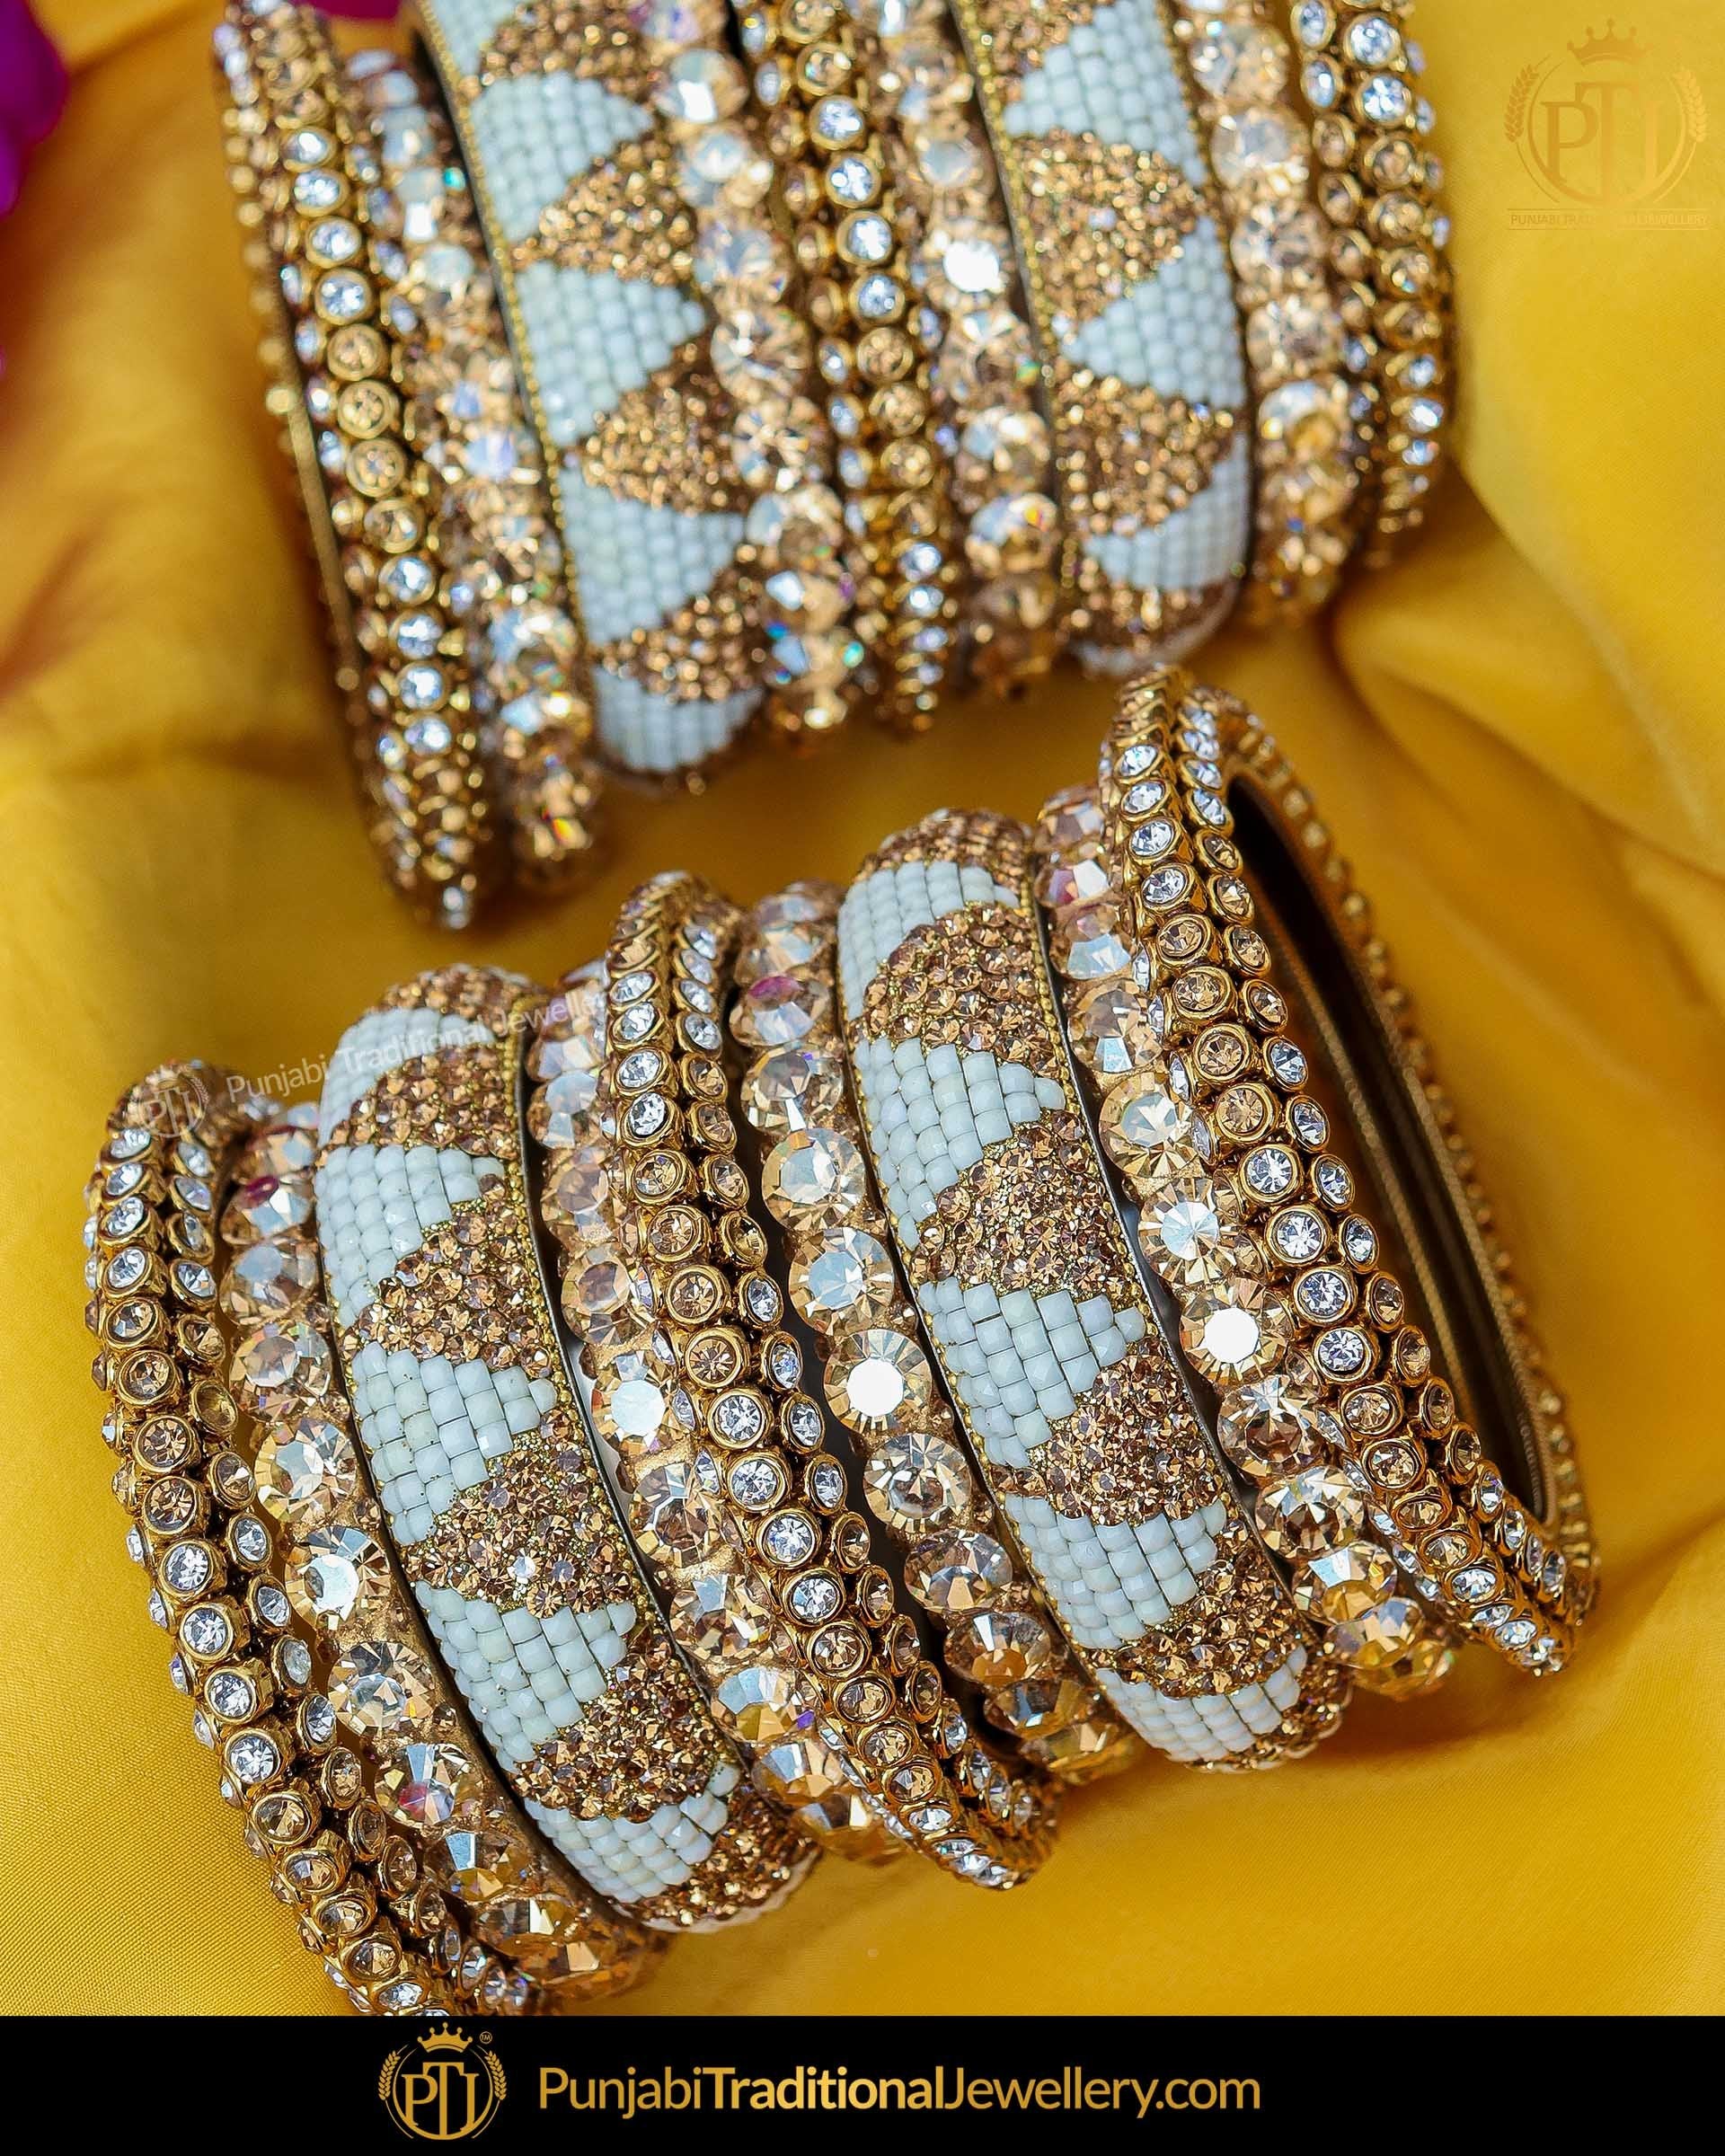 Gold Finished Polki Firozi Pearl Bangles Set (Both Hand Pair) | Punjabi Traditional Jewellery Exclusive